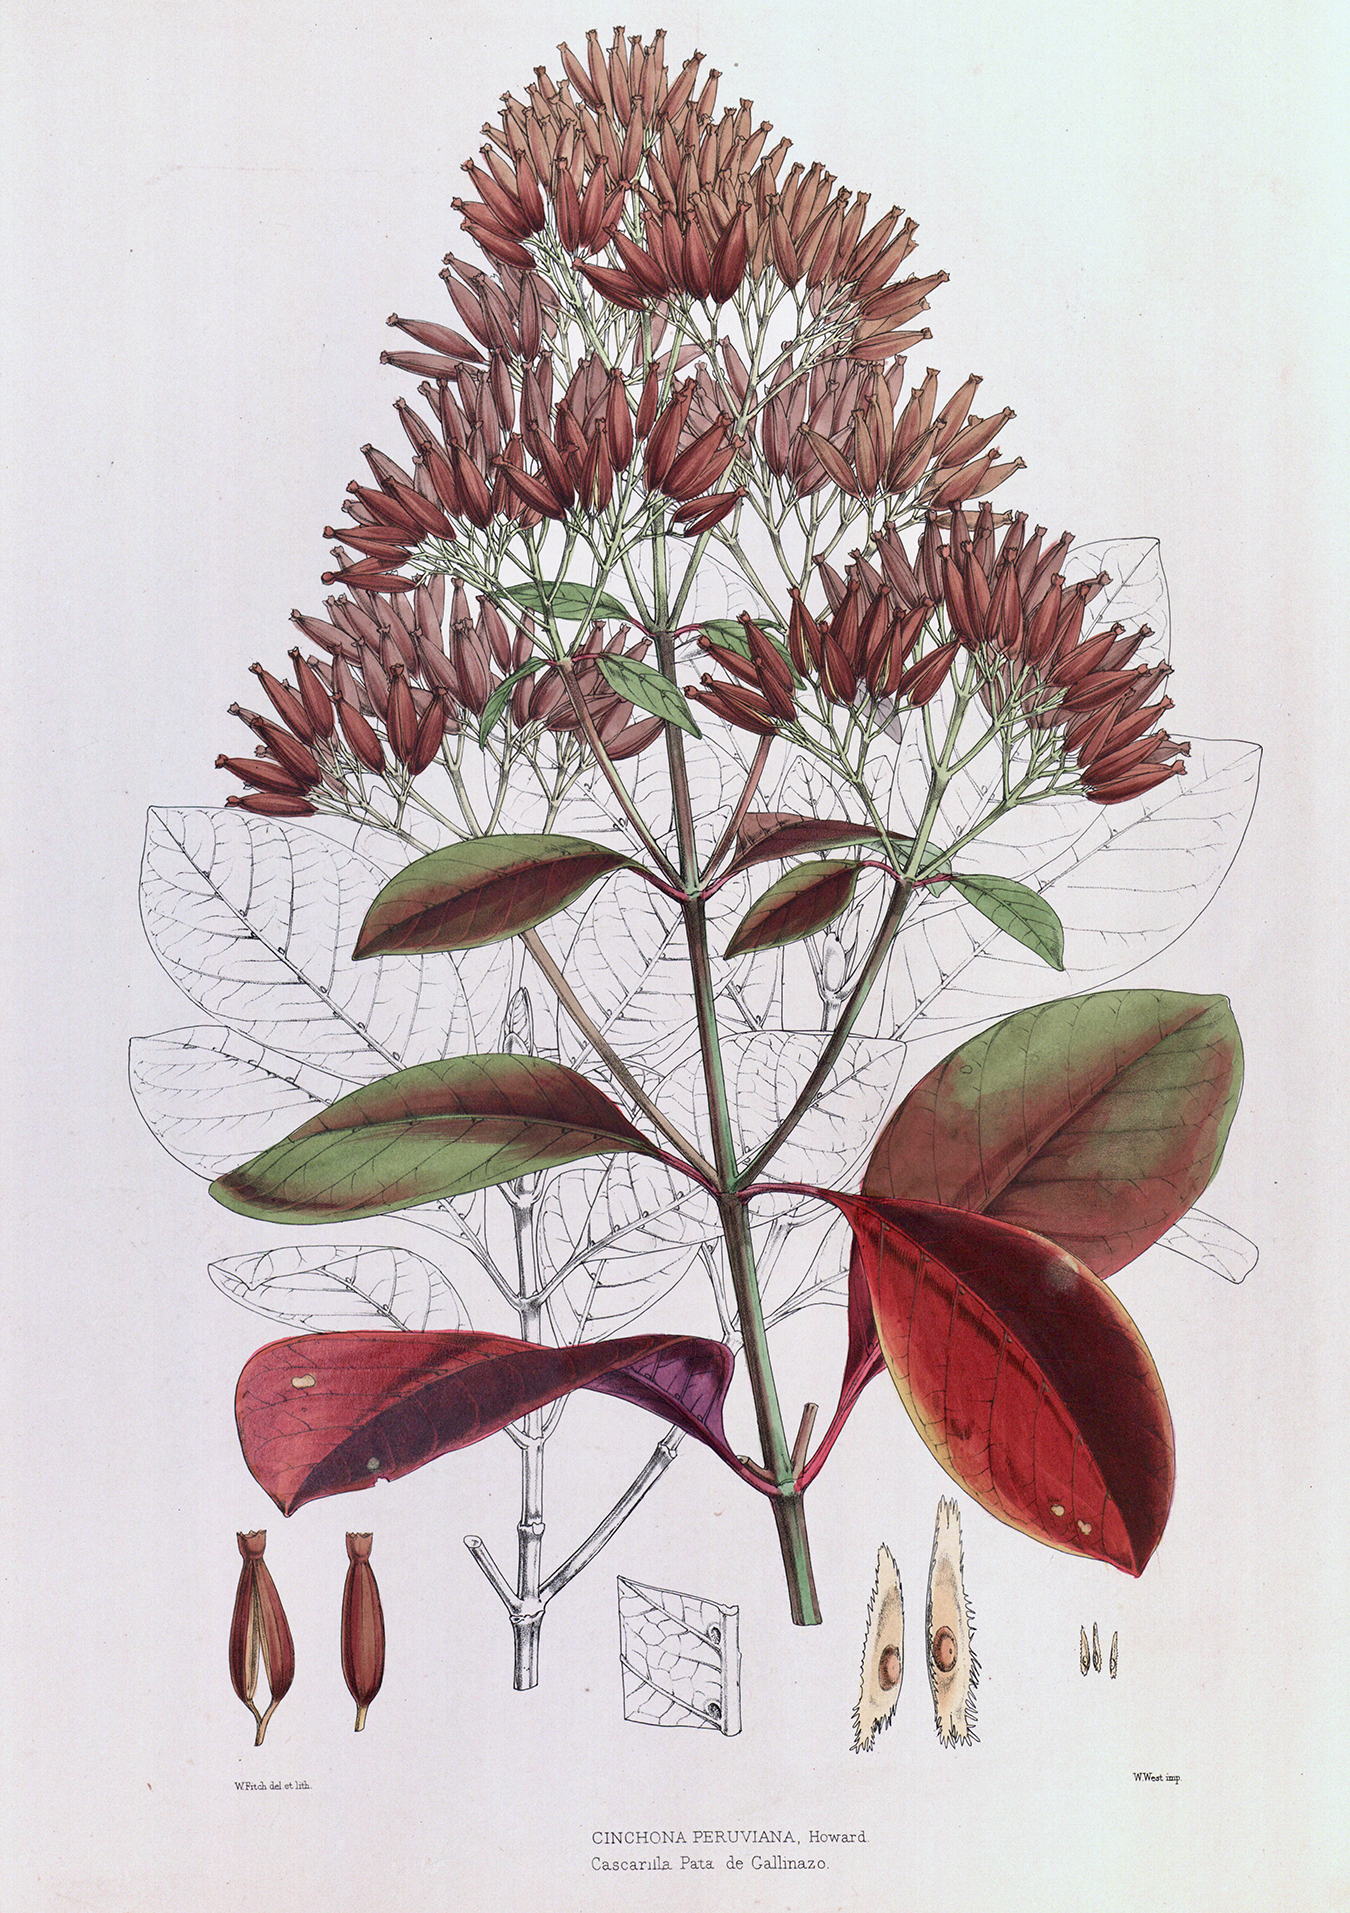 A hand drawn and colored botanical illustration with dark red leaves and flowers.